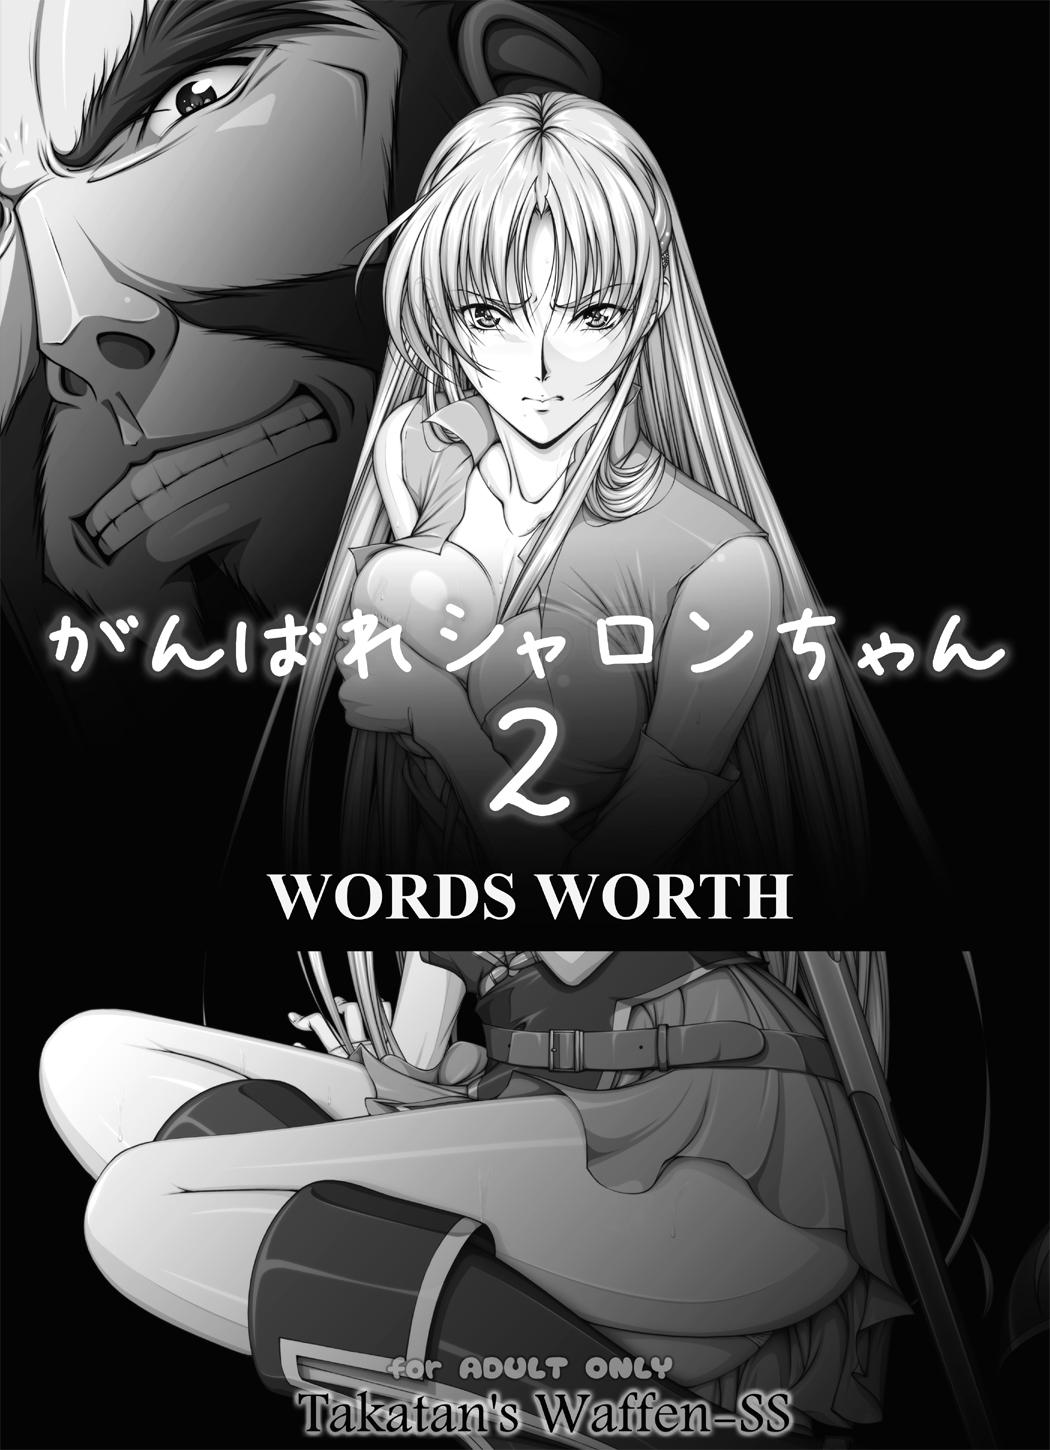 [Takatan's Waffen-SS] Fight, Sharon! 2 [Deluxe Edition] (Words Worth) +omake 7